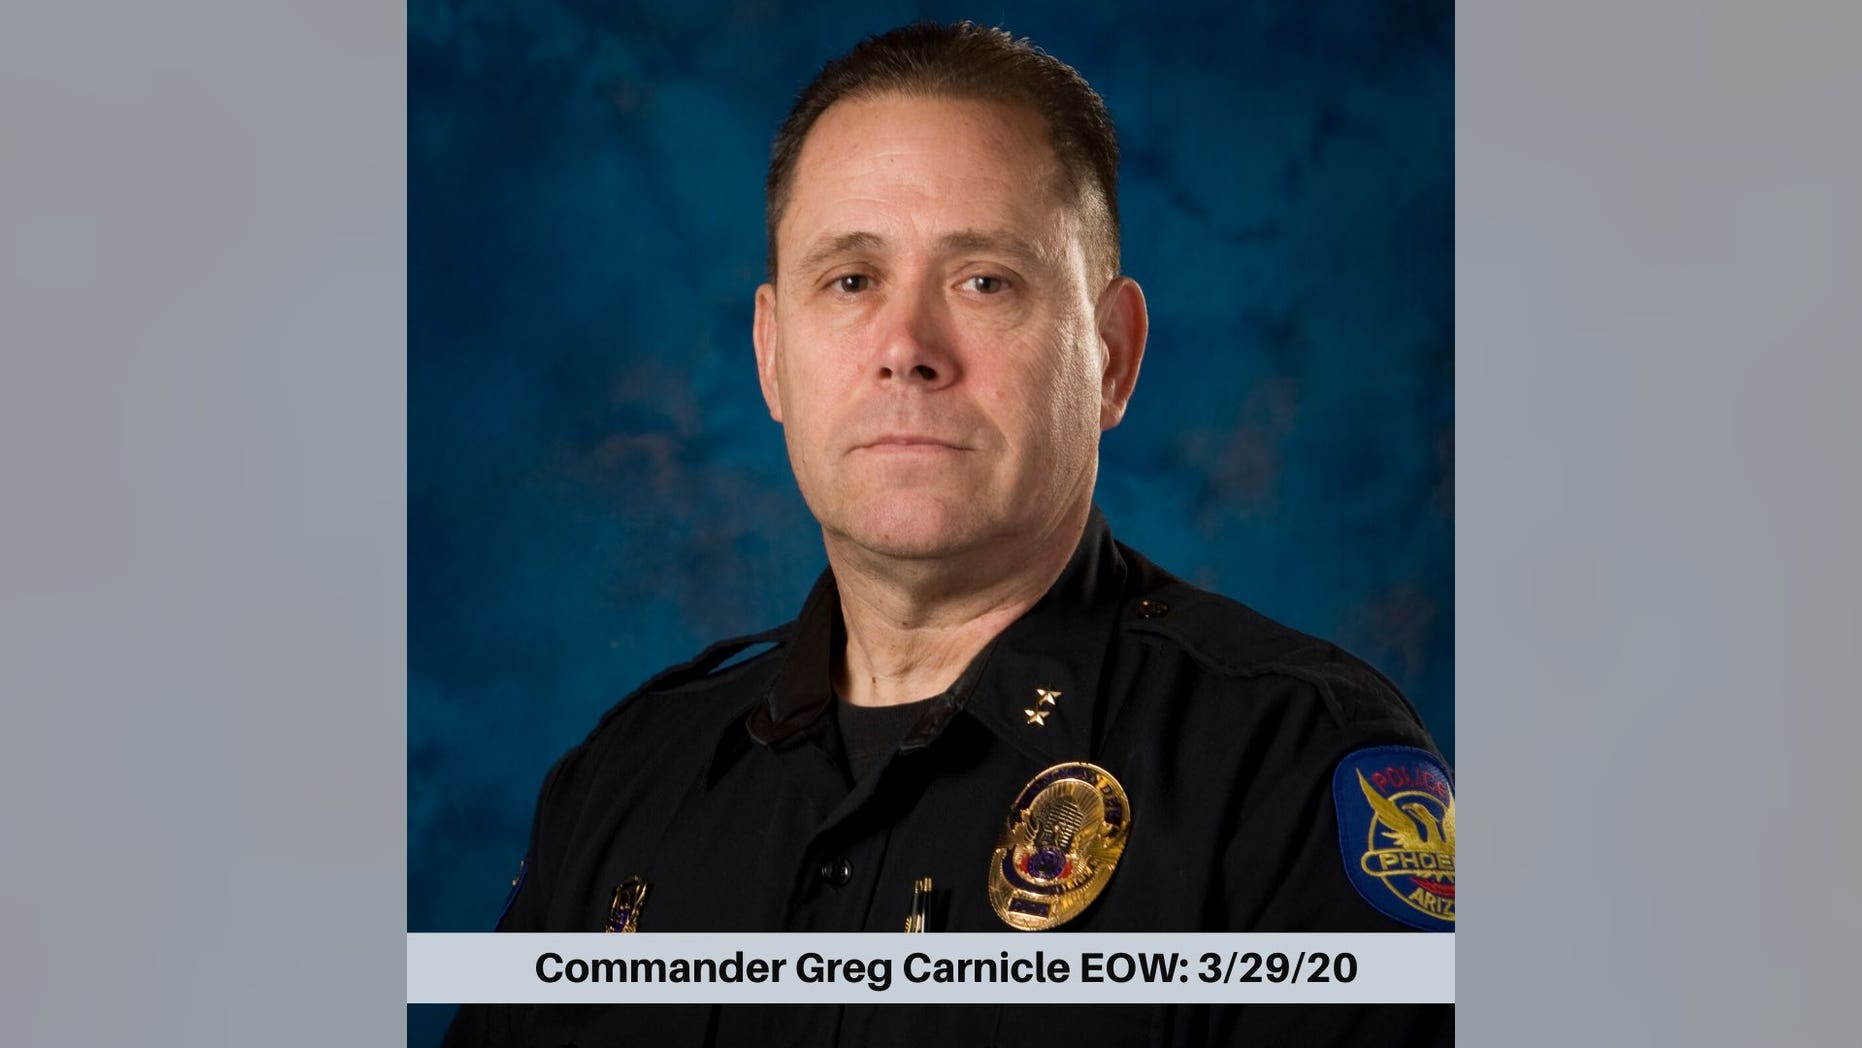 Greg Carnicle, a commander at the department who was months away from retirement, was identified as the deceased officer.